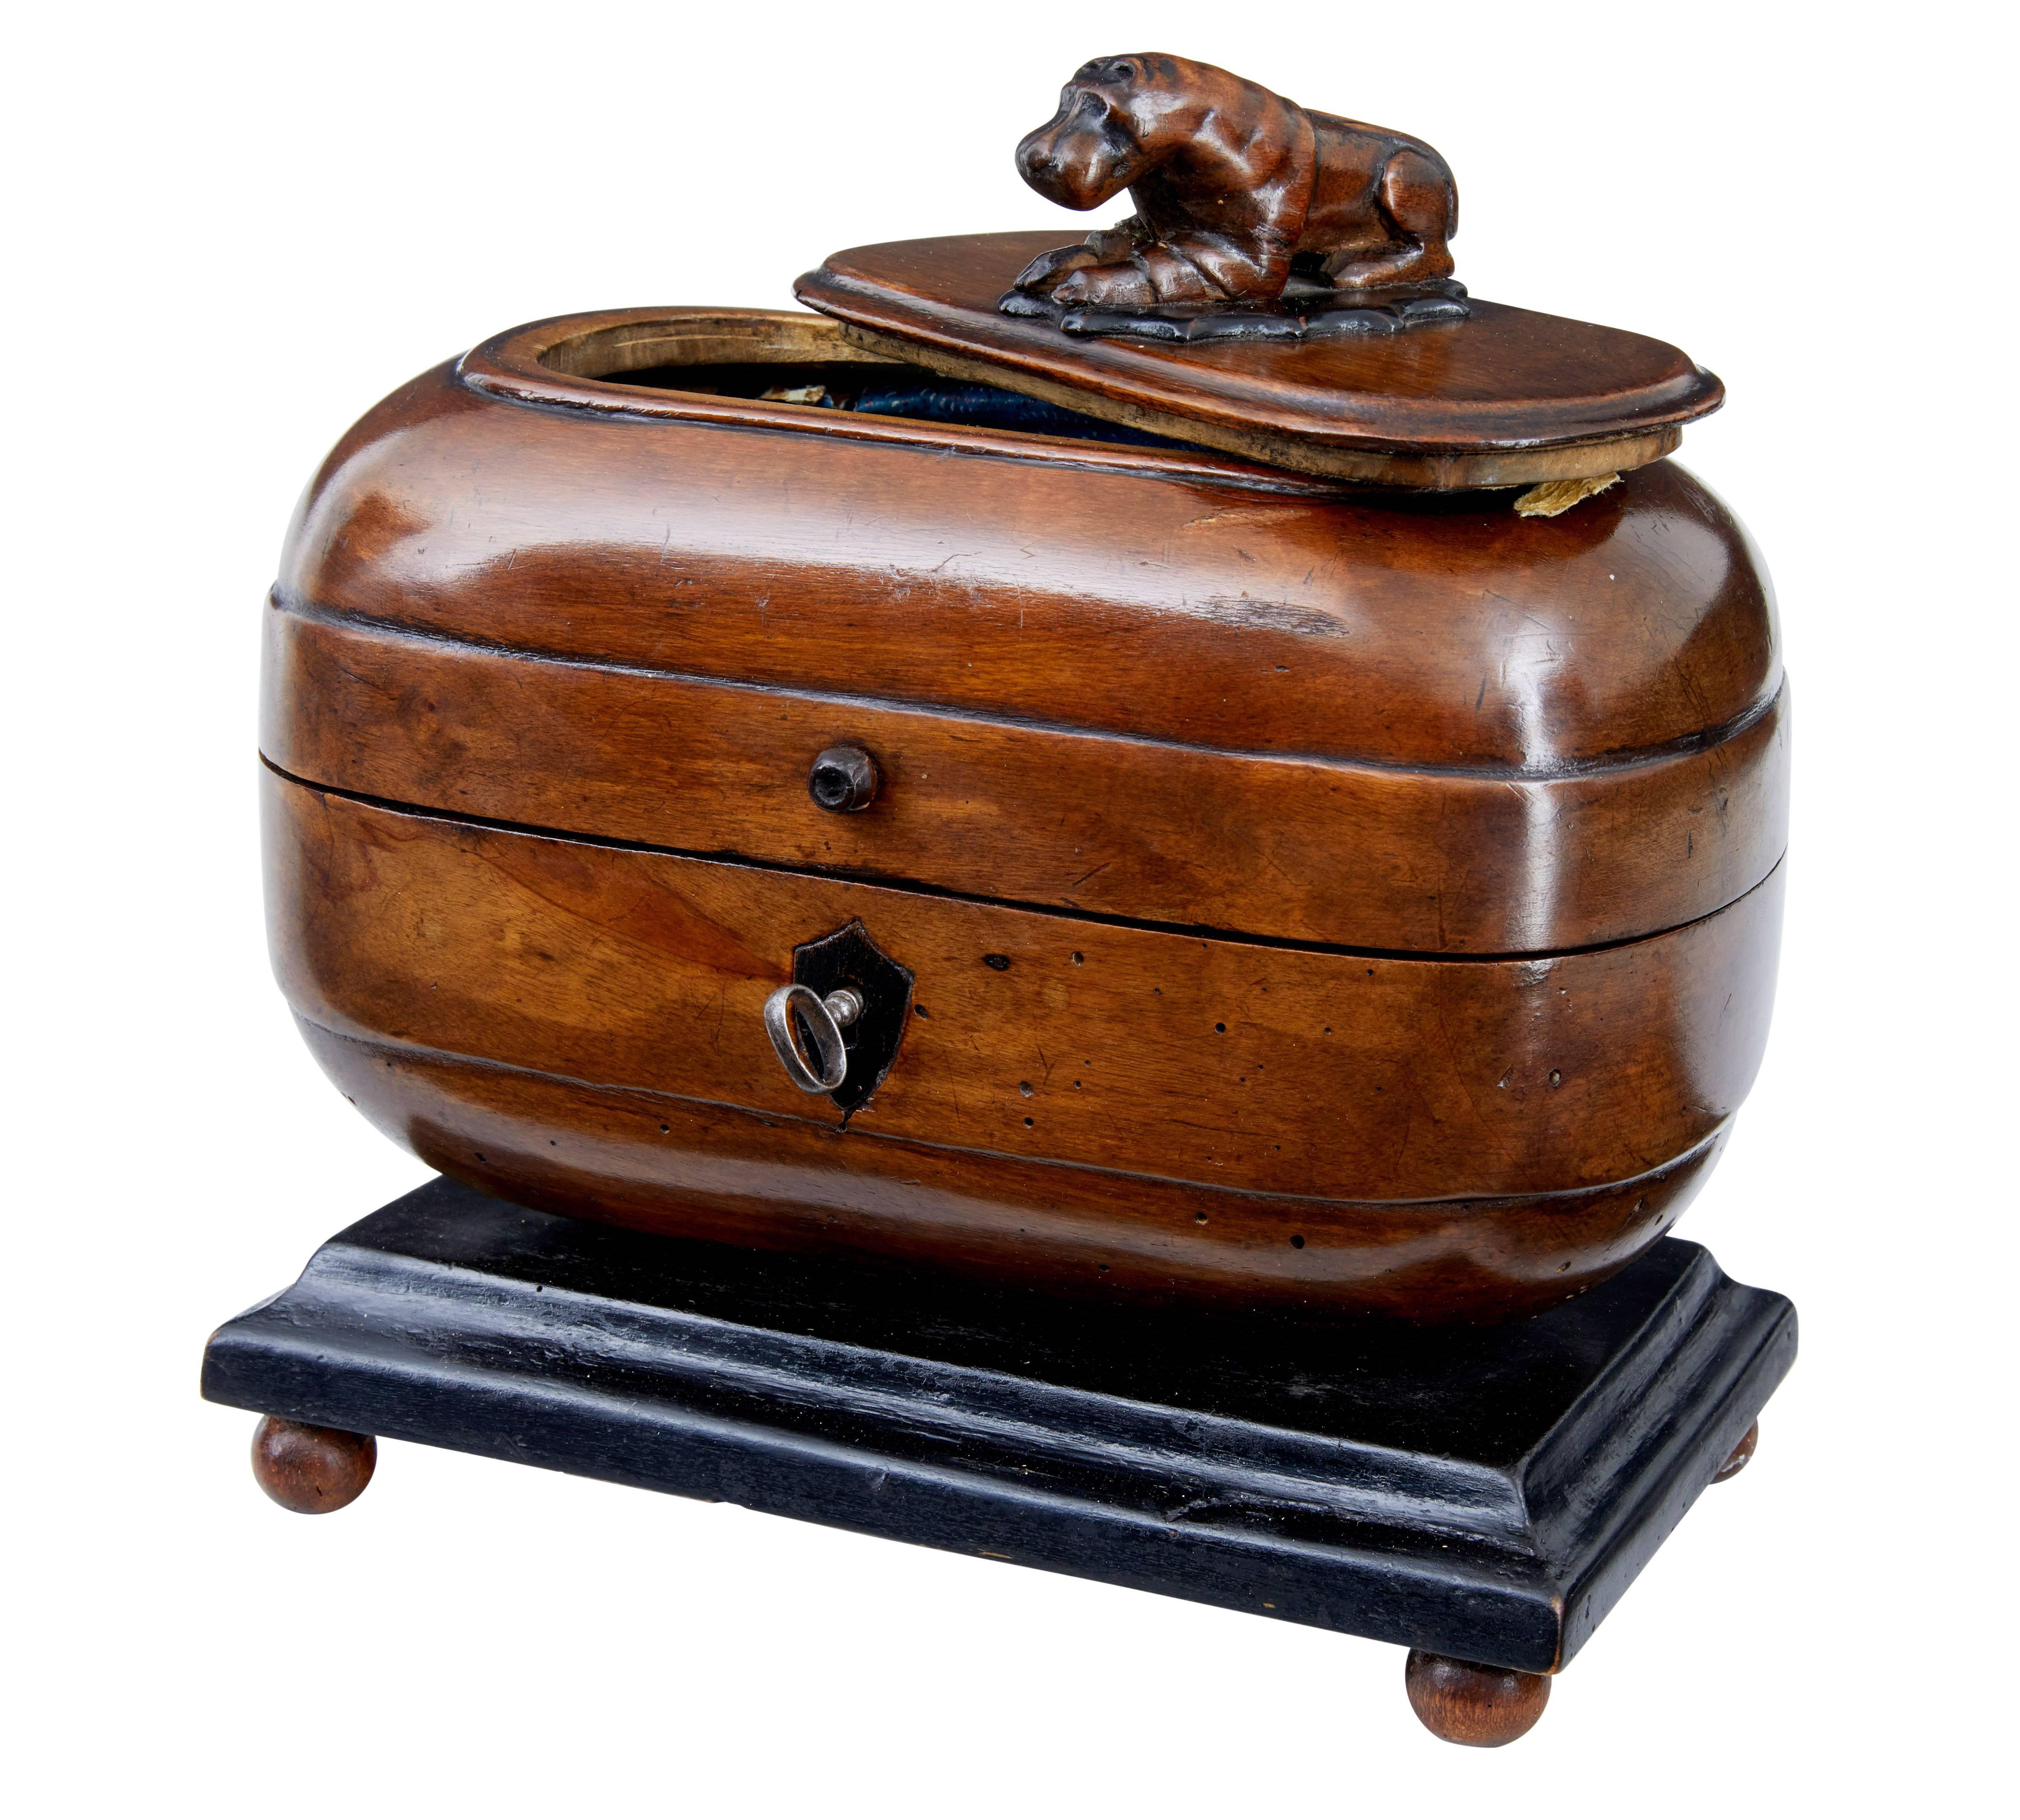 Rare fruitwood tea caddy, circa 1810.
Complete with a carved hippo on the lid which forms the handle to the top compartment.
Original lock and key opens the main storage vessel.
Later ebonized plinth and round feet.

Measures: Height 8